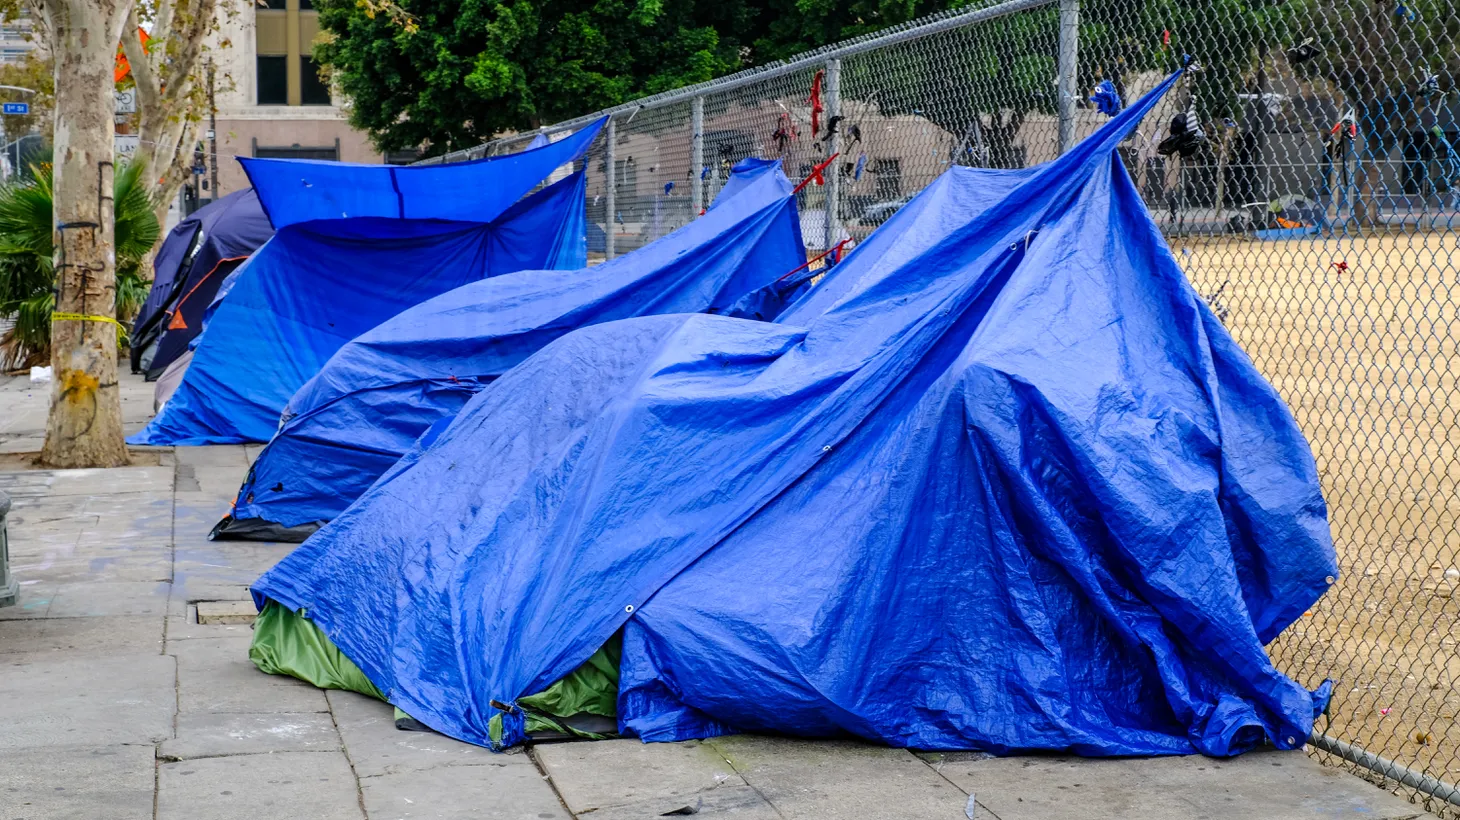 Homeless encampments are lined up near LA City Hall, October 14, 2022.